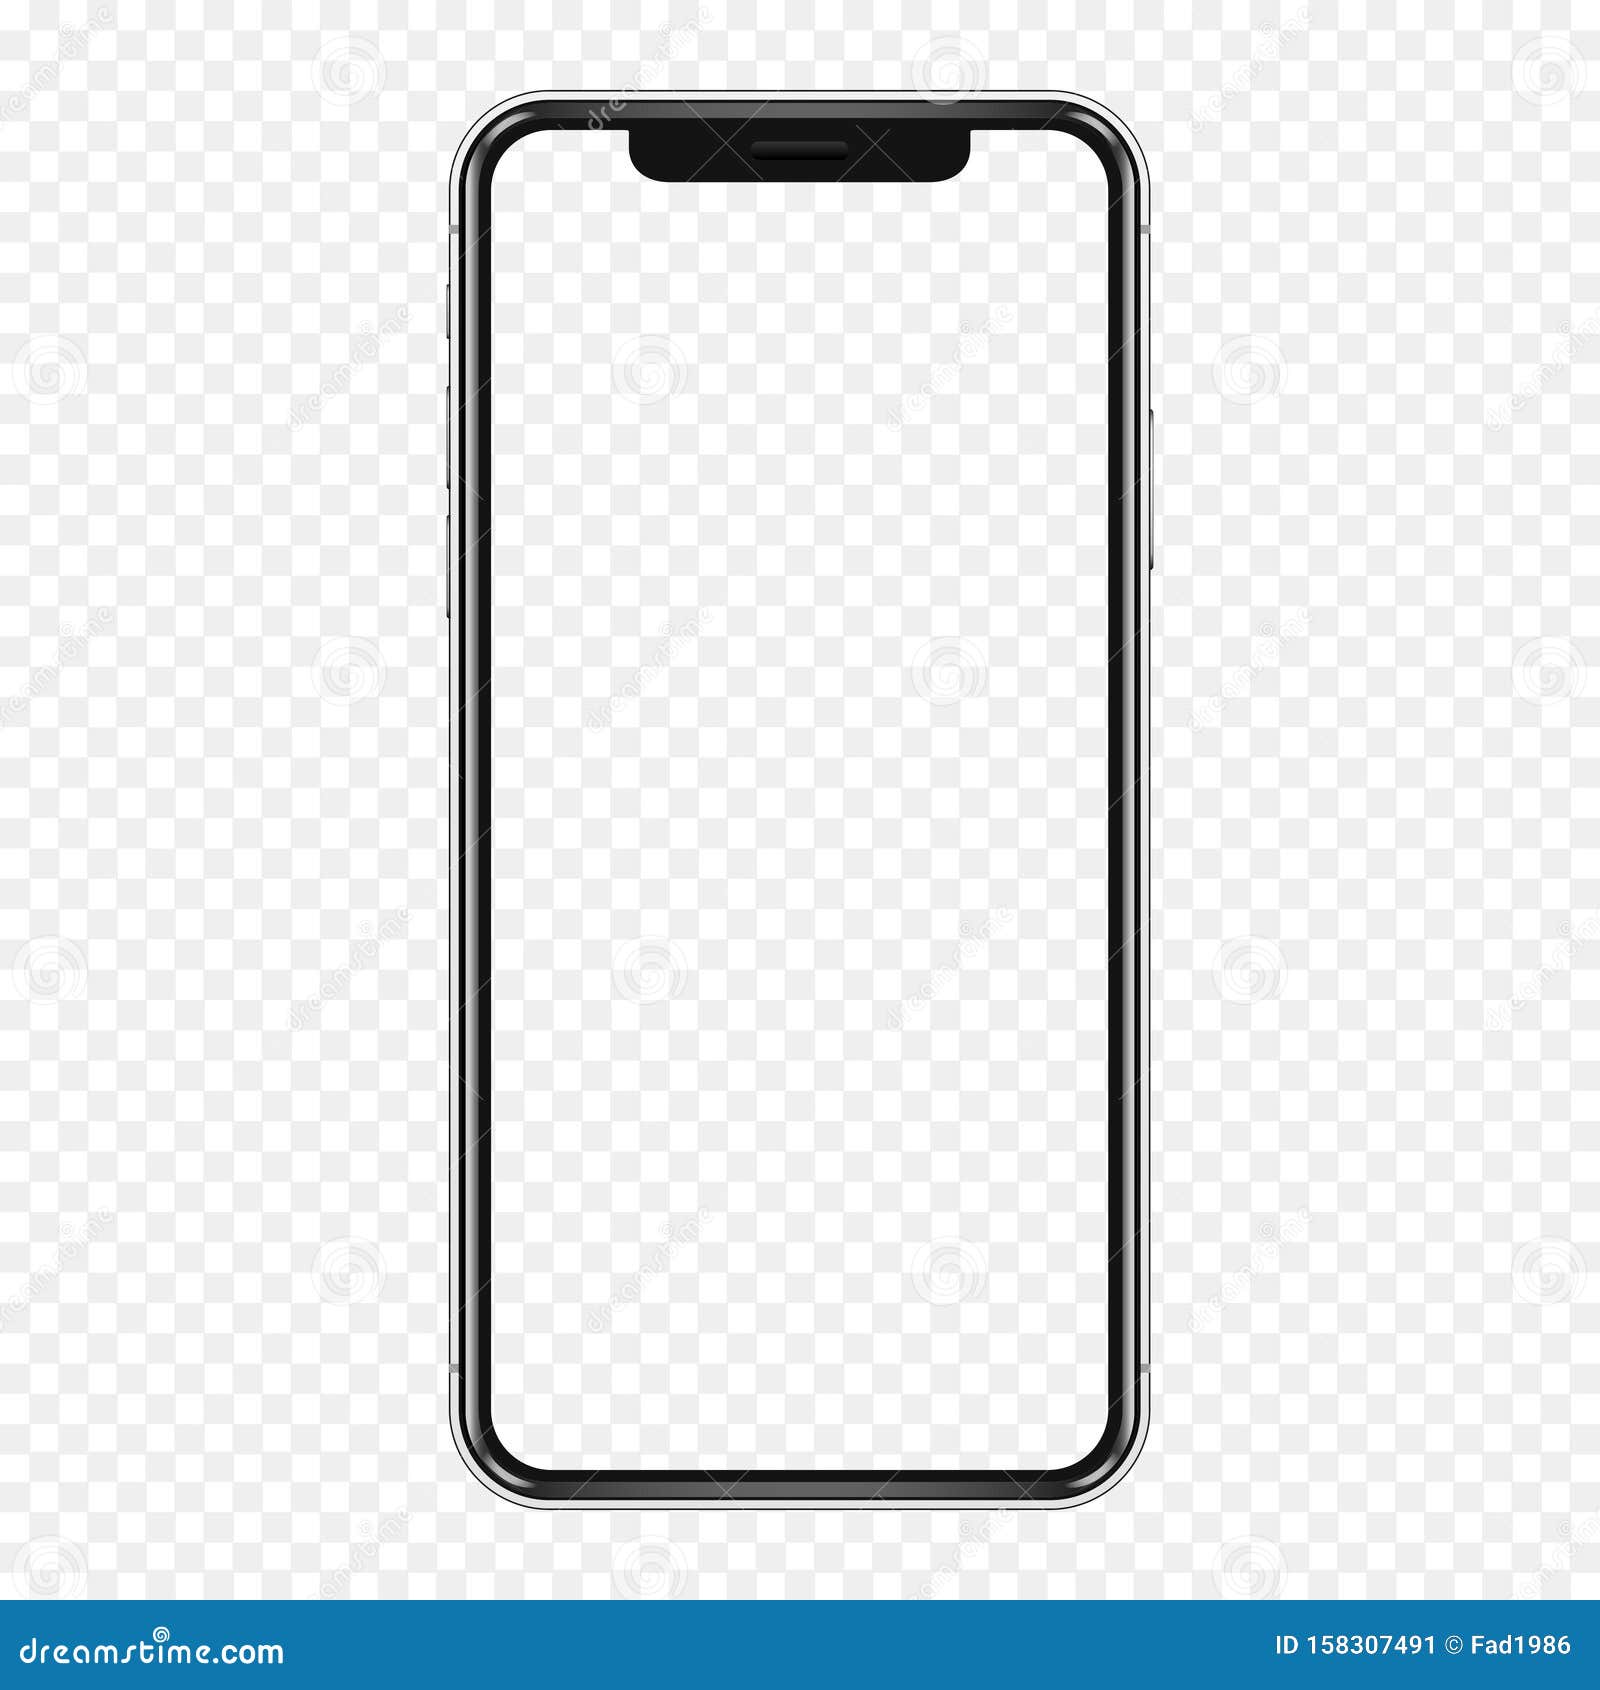 Smartphone Mockup Cellphone Frame With Transparent Display Isolated Template Stock Vector Illustration Of Isolated Camera 158307491